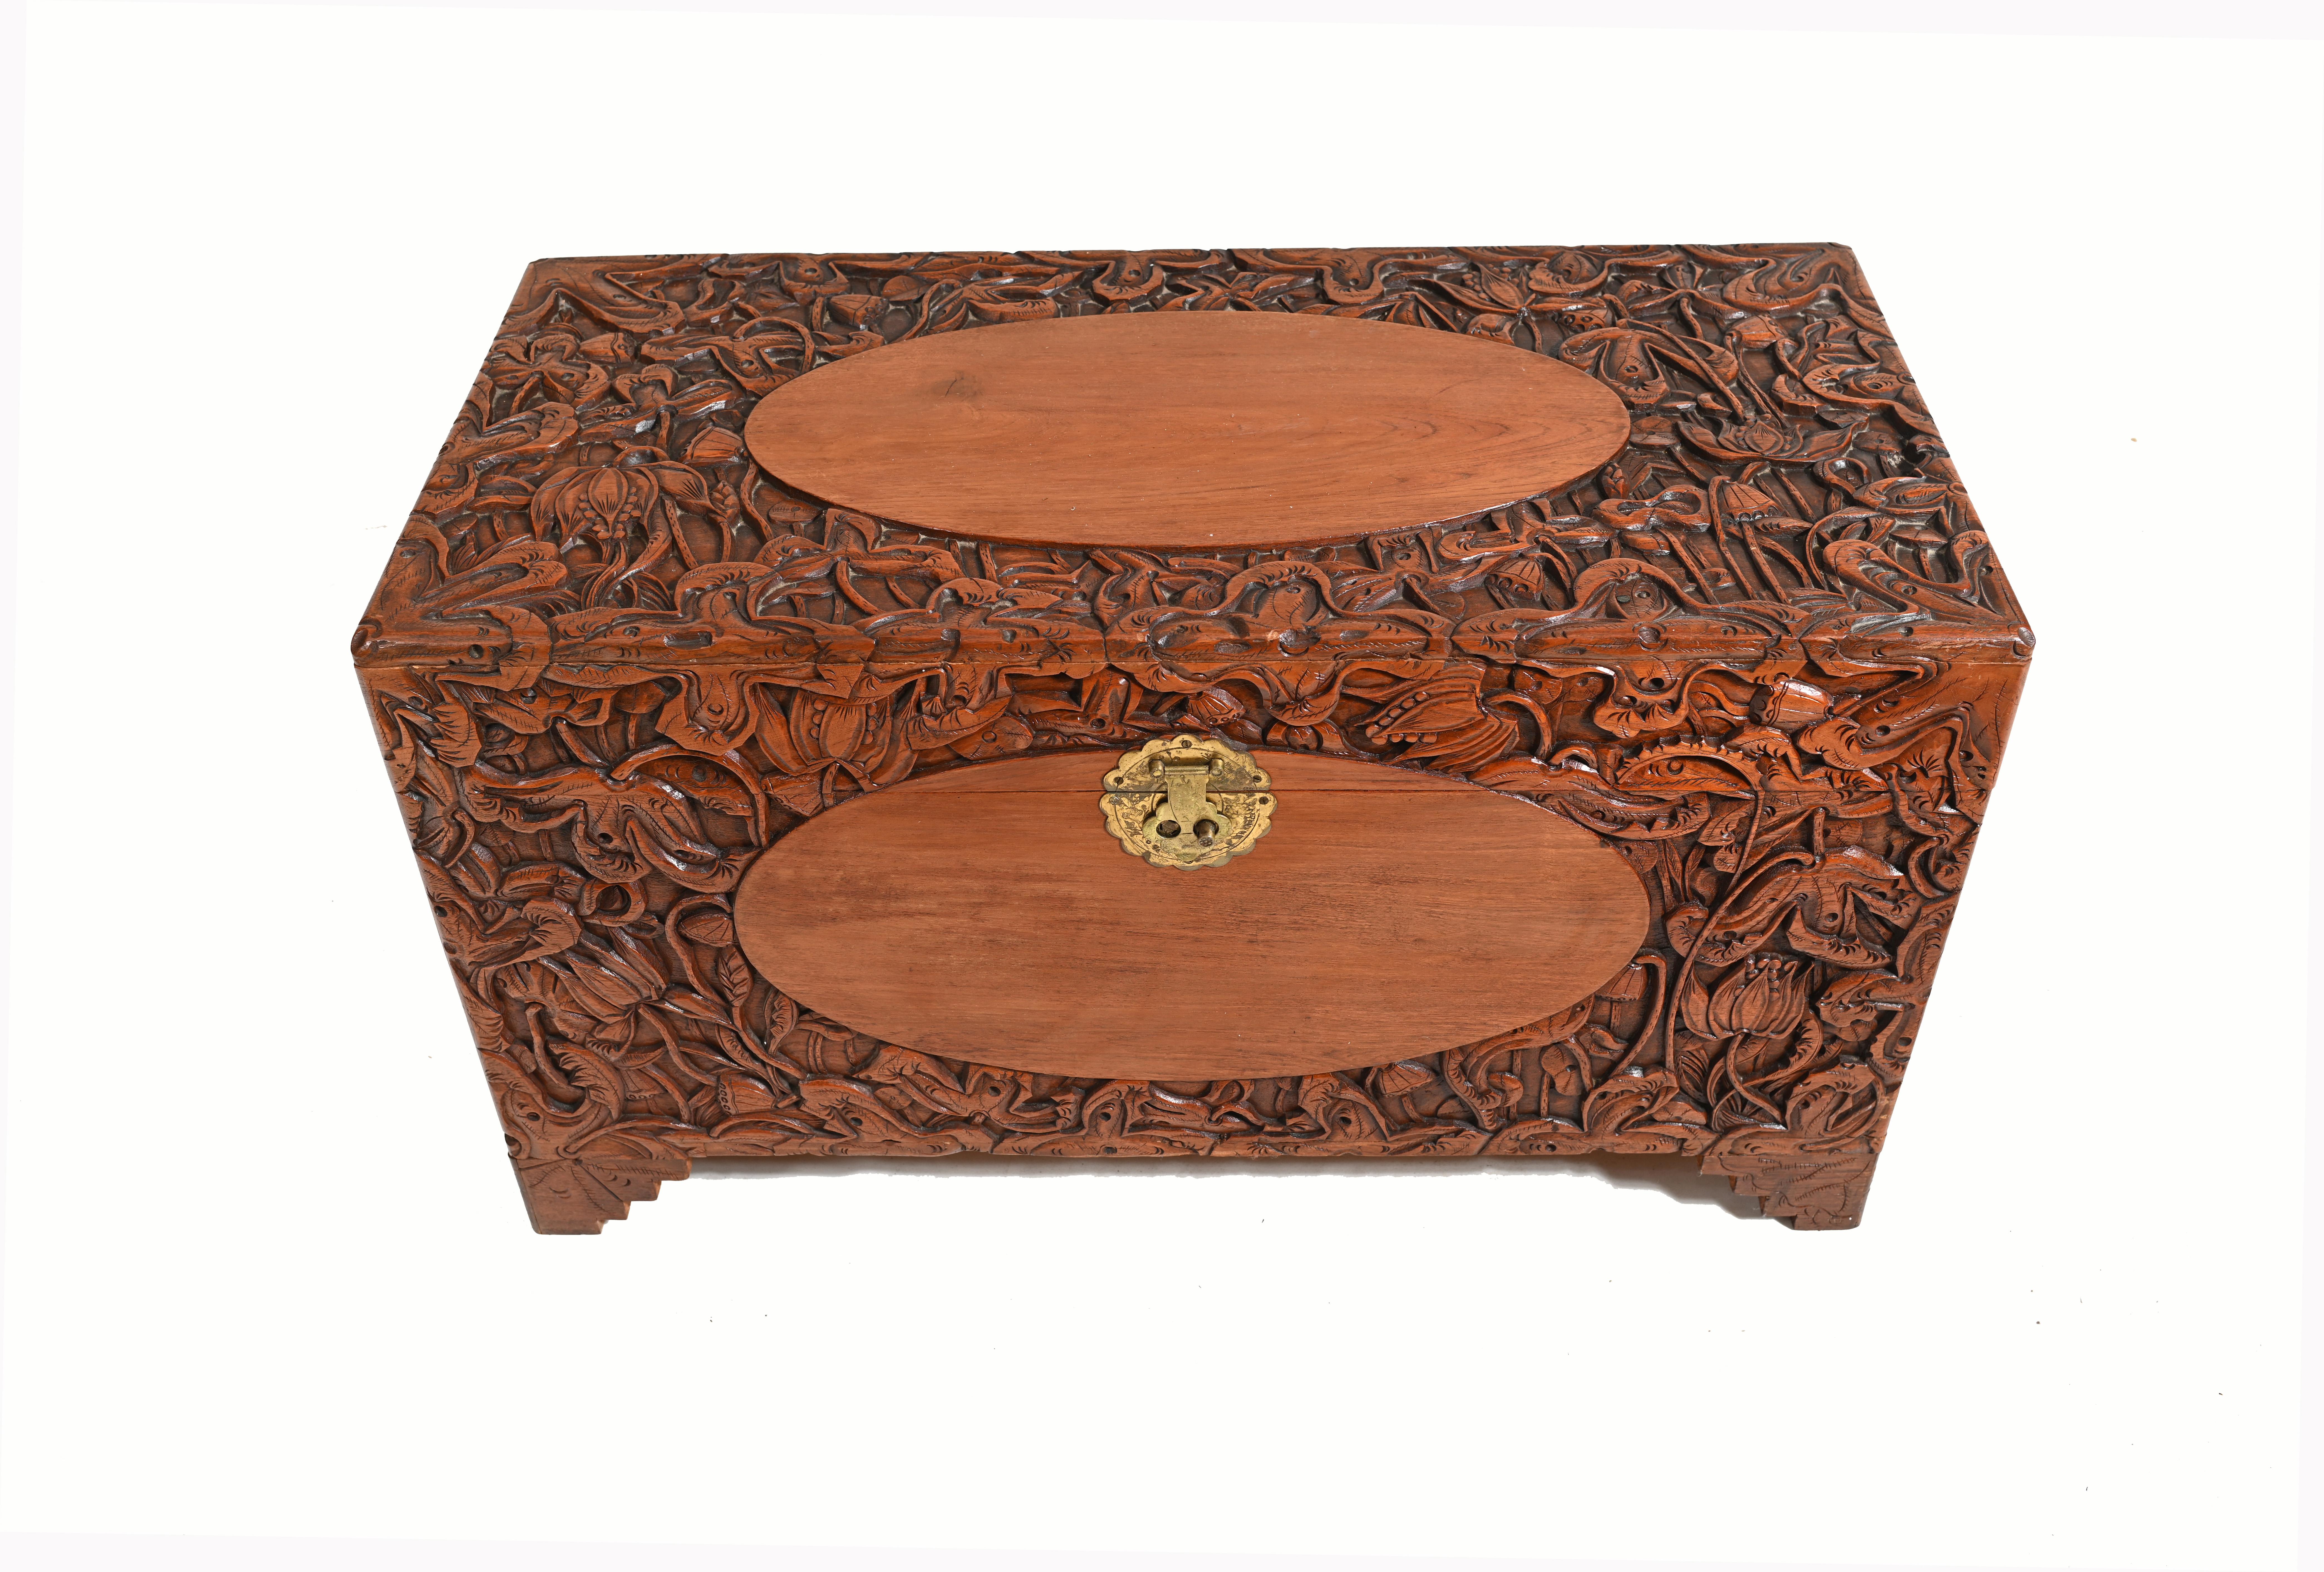 A heavily carved Chinese camphor wood chest, circa 1930.
Great interiors piece, can work as a side or coffee table.
Carving is amazingly intricate and profuse.

Offered in great shape ready for home use right away.